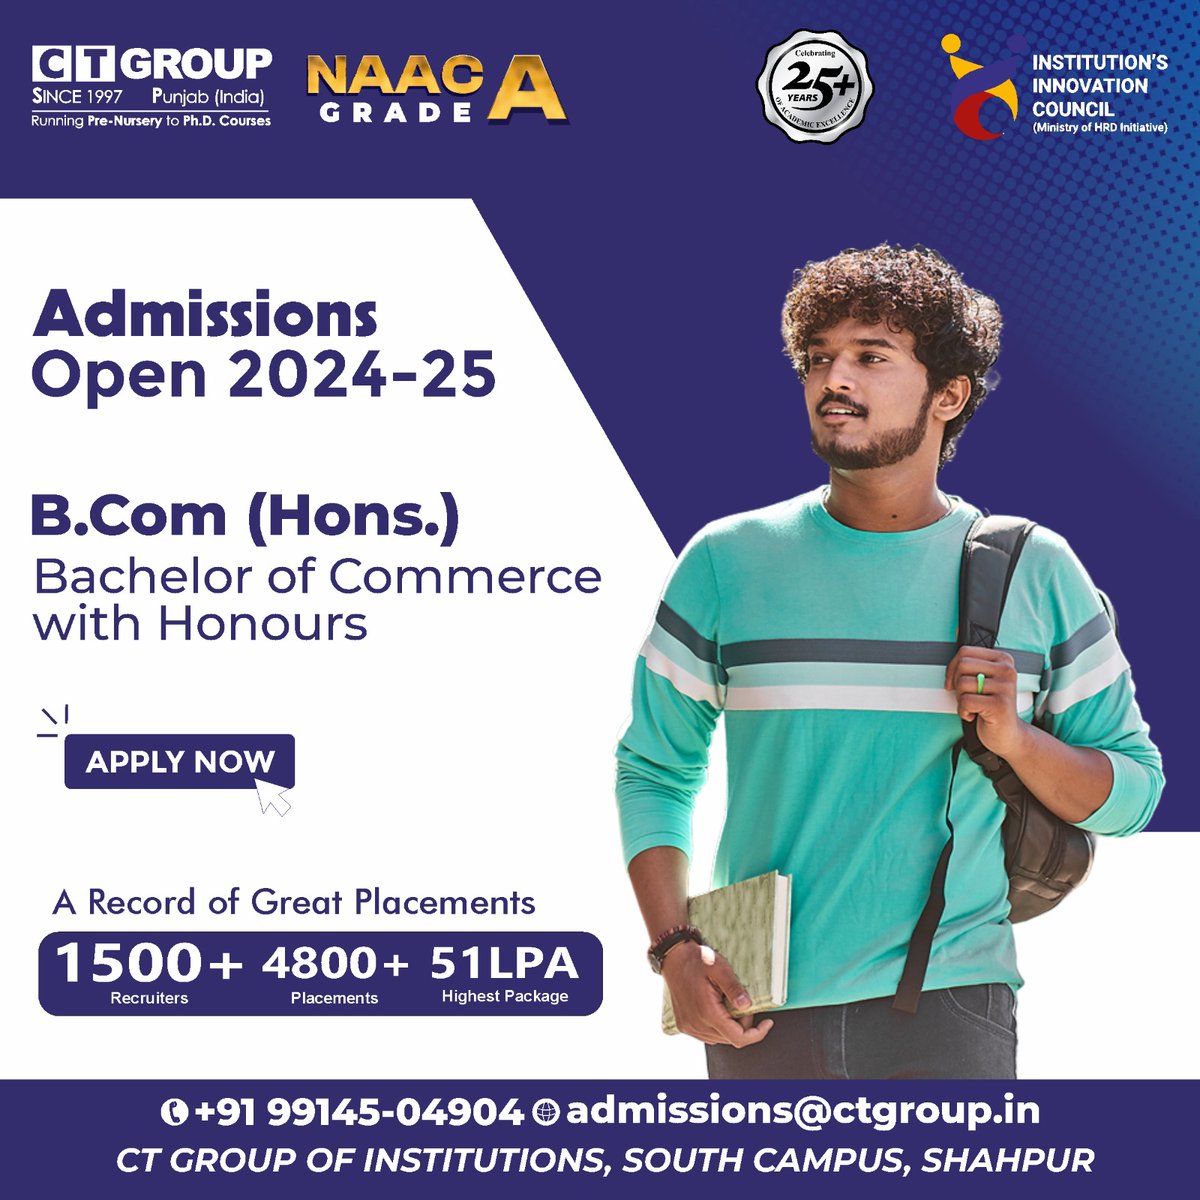 🎓 Explore Your Future with CT Group of Institutions! 🎓 Join us for an exclusive opportunity to shape your career: 🌟 Admissions Open 2024-25 🌟 Program: B.Com (Hons.) - Bachelor of Commerce with Honours Experience a curriculum designed for success.